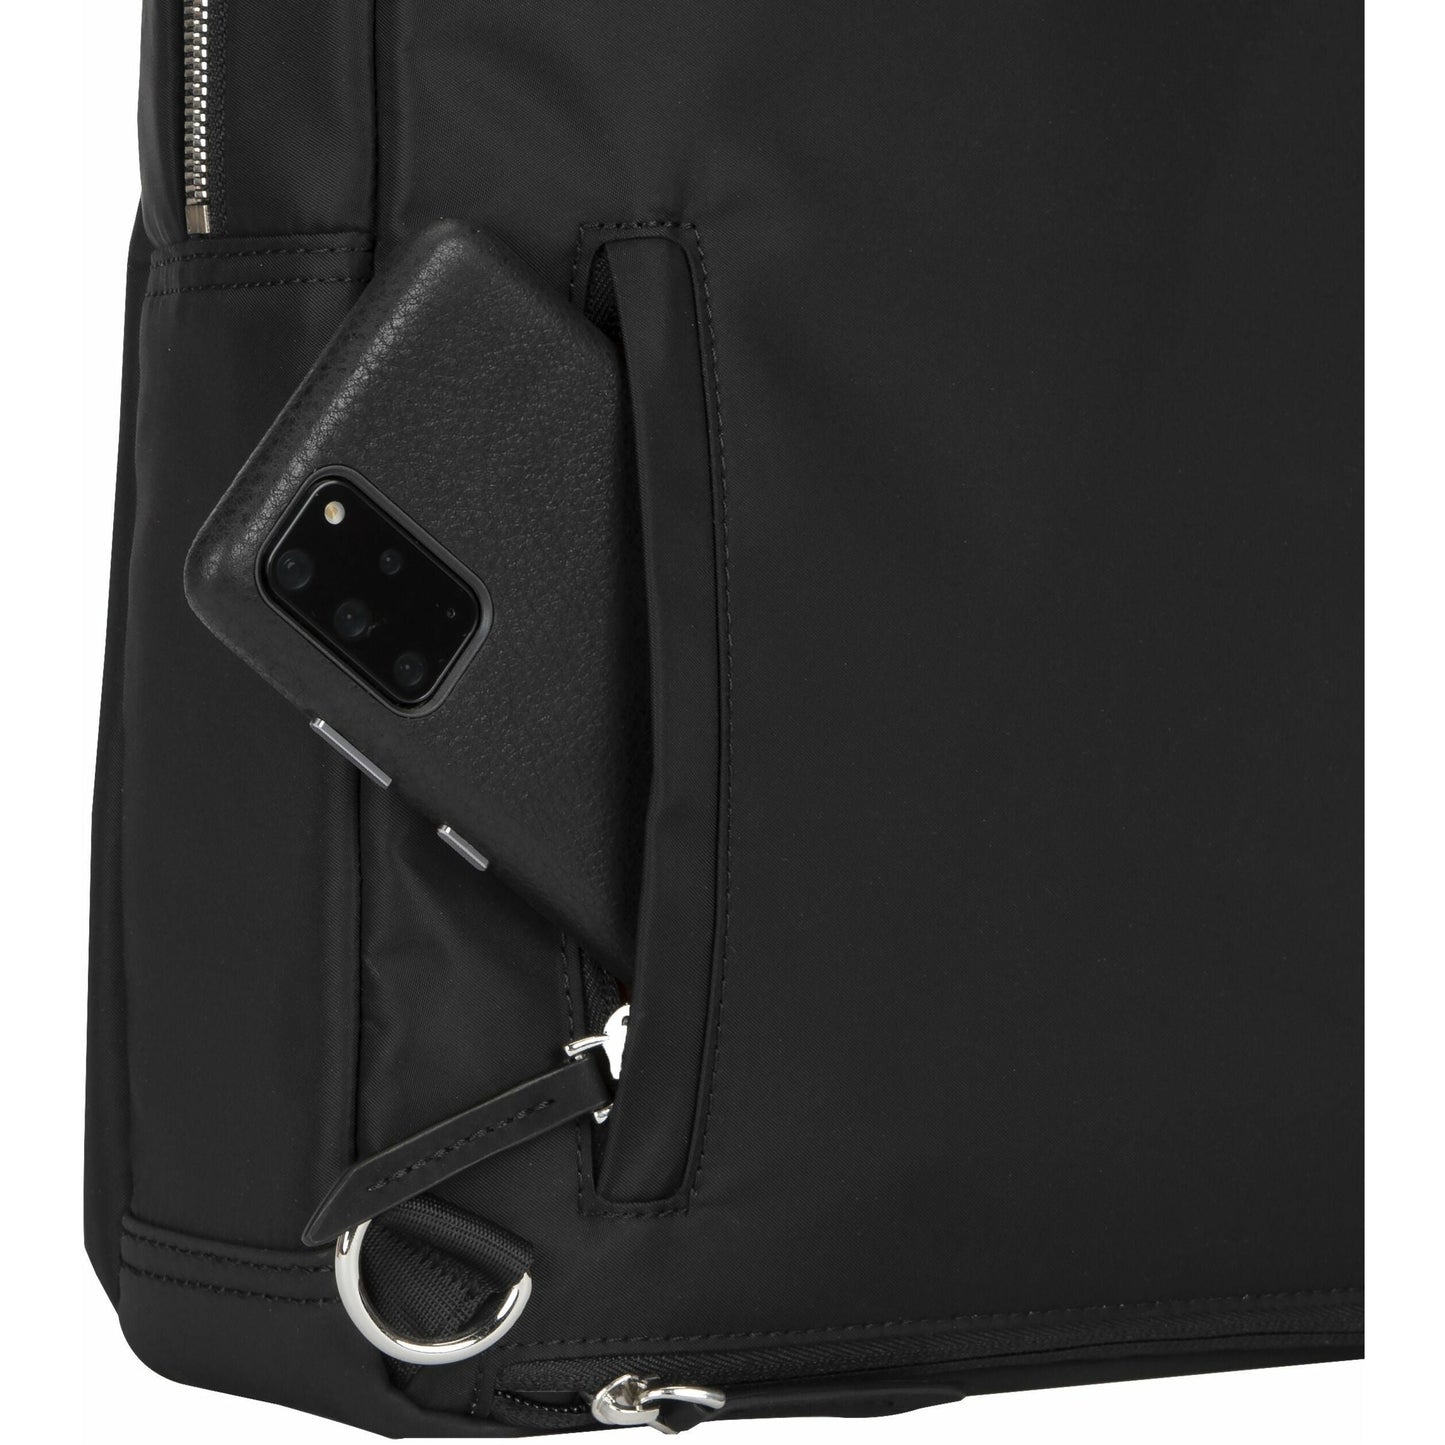 Targus Newport TBB598GL Carrying Case (Backpack) for 15" to 16" Notebook - Black